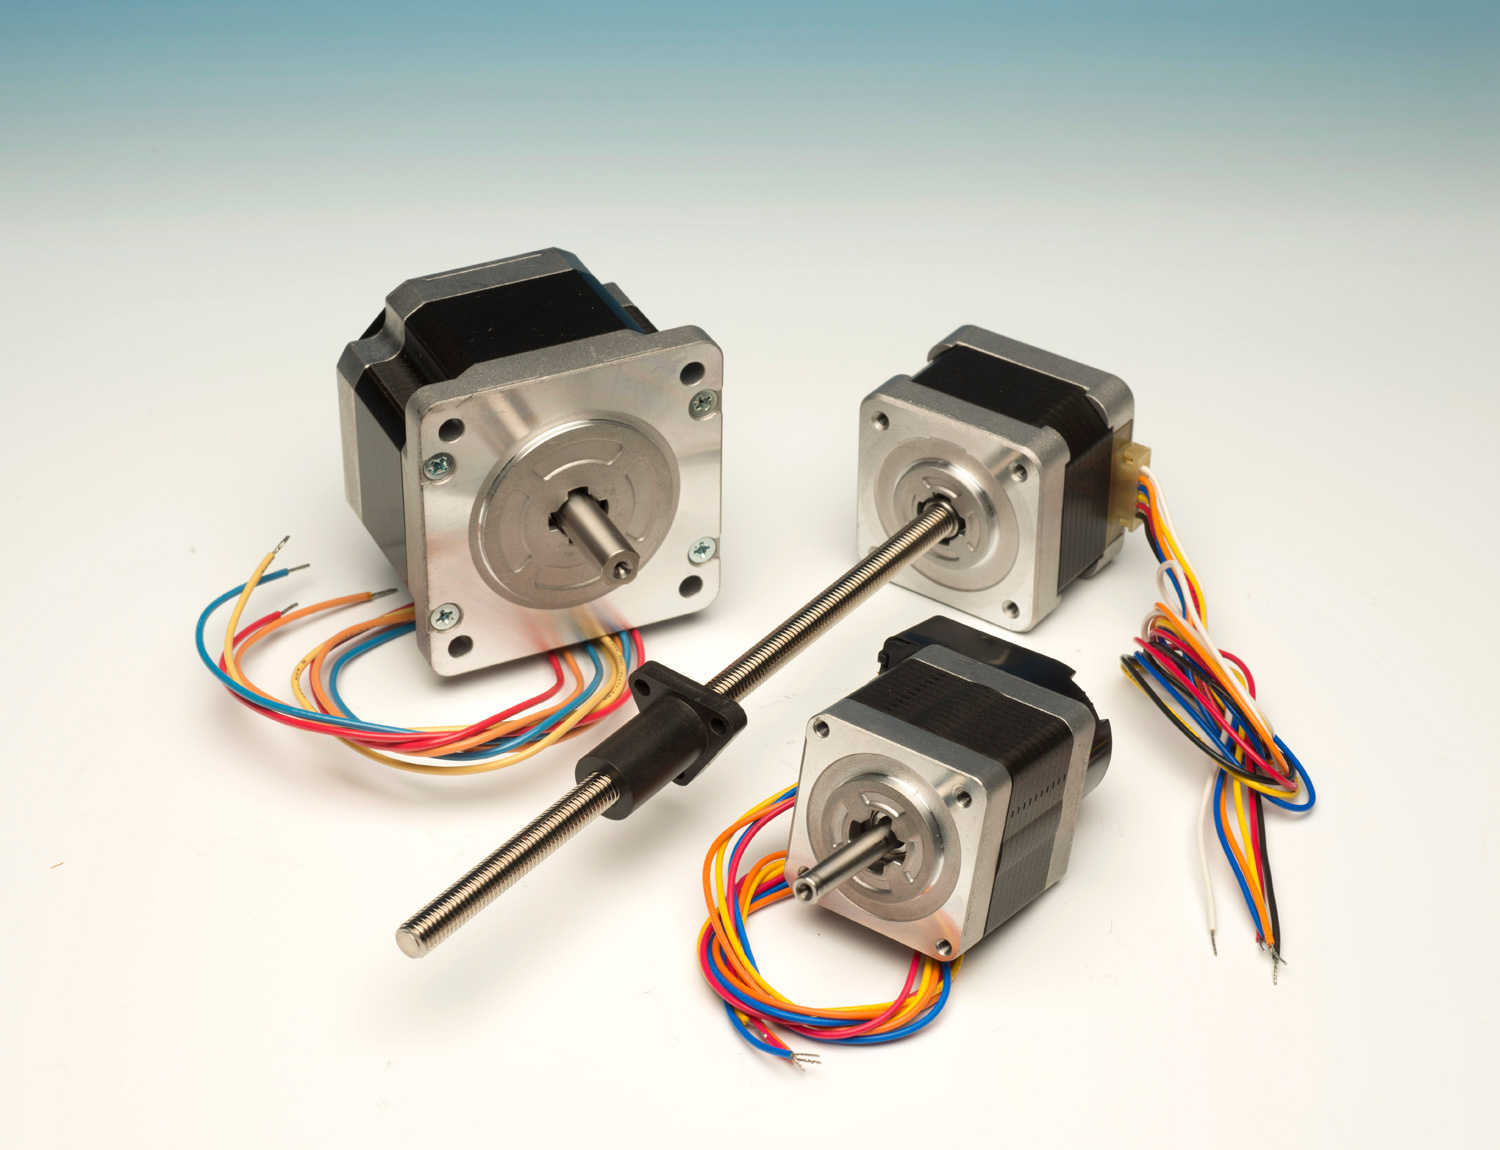 Two-phase stepper motors of the Sanmotion F2 series, now available from Intelligent Automation